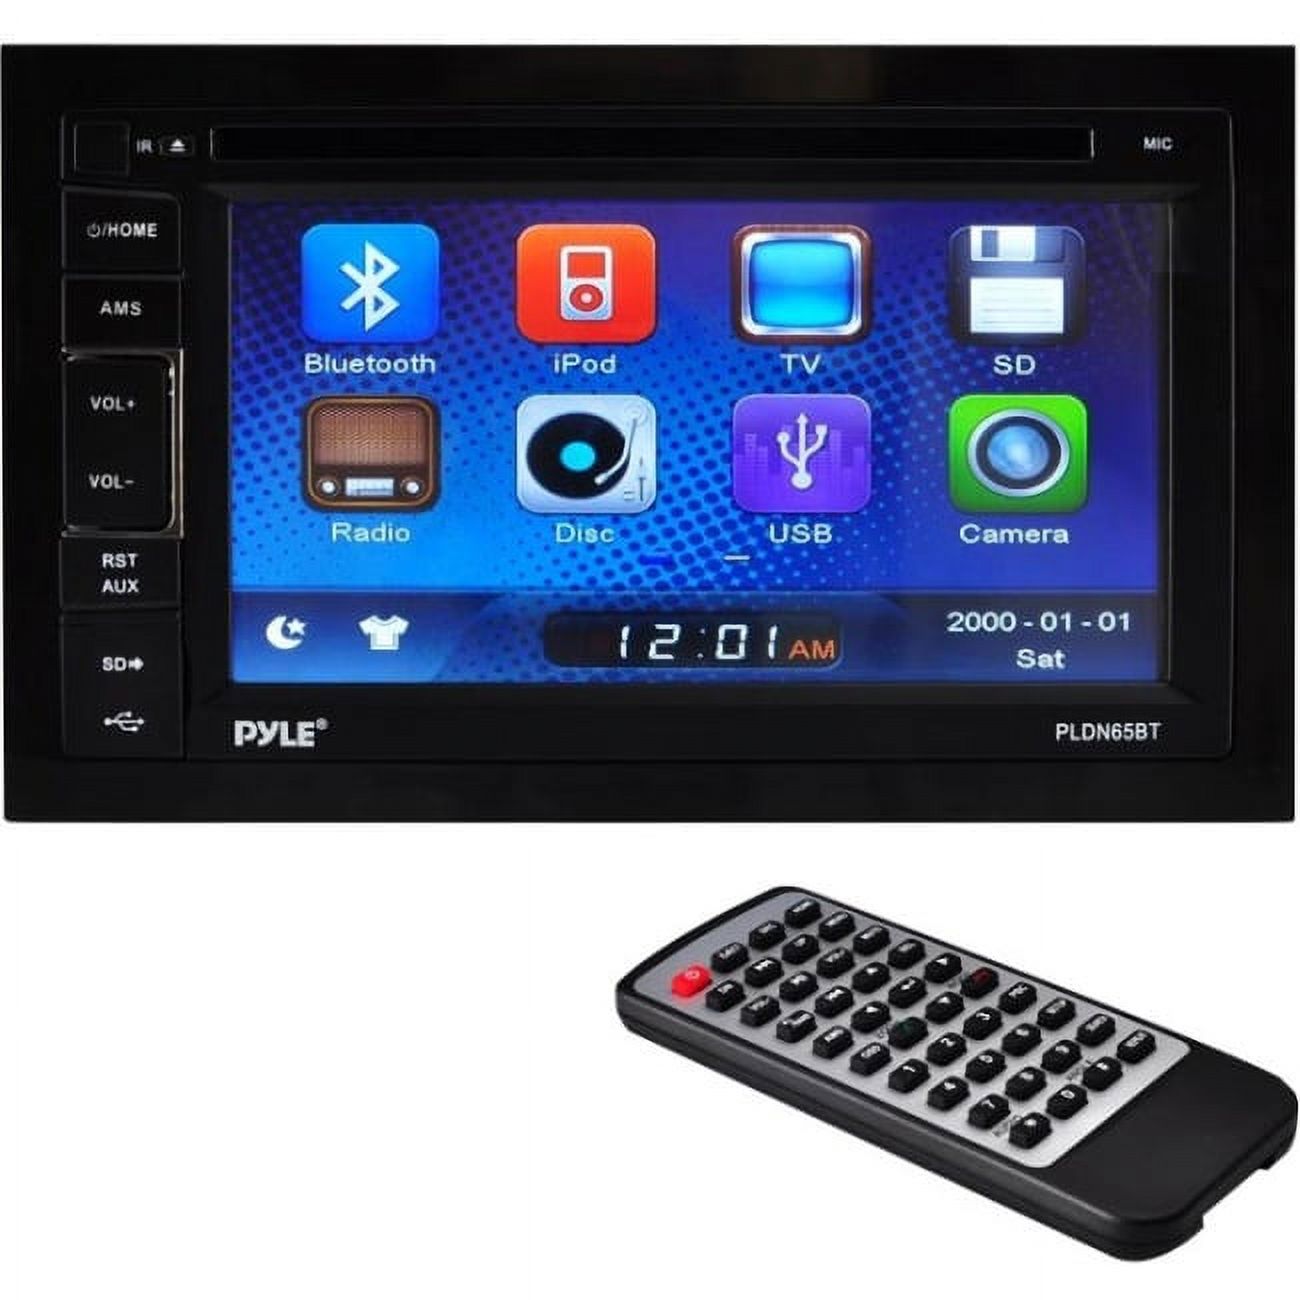 PYLE PLDN65BT - 6.5'' Double DIN In-Dash Touch Screen TFT/LCD Monitor w/MultimediaDisc/CD/MP3/MP4/CD-R/USB/SD-MMC Card Slot AM/FM, Bluetooth receiver - image 2 of 2